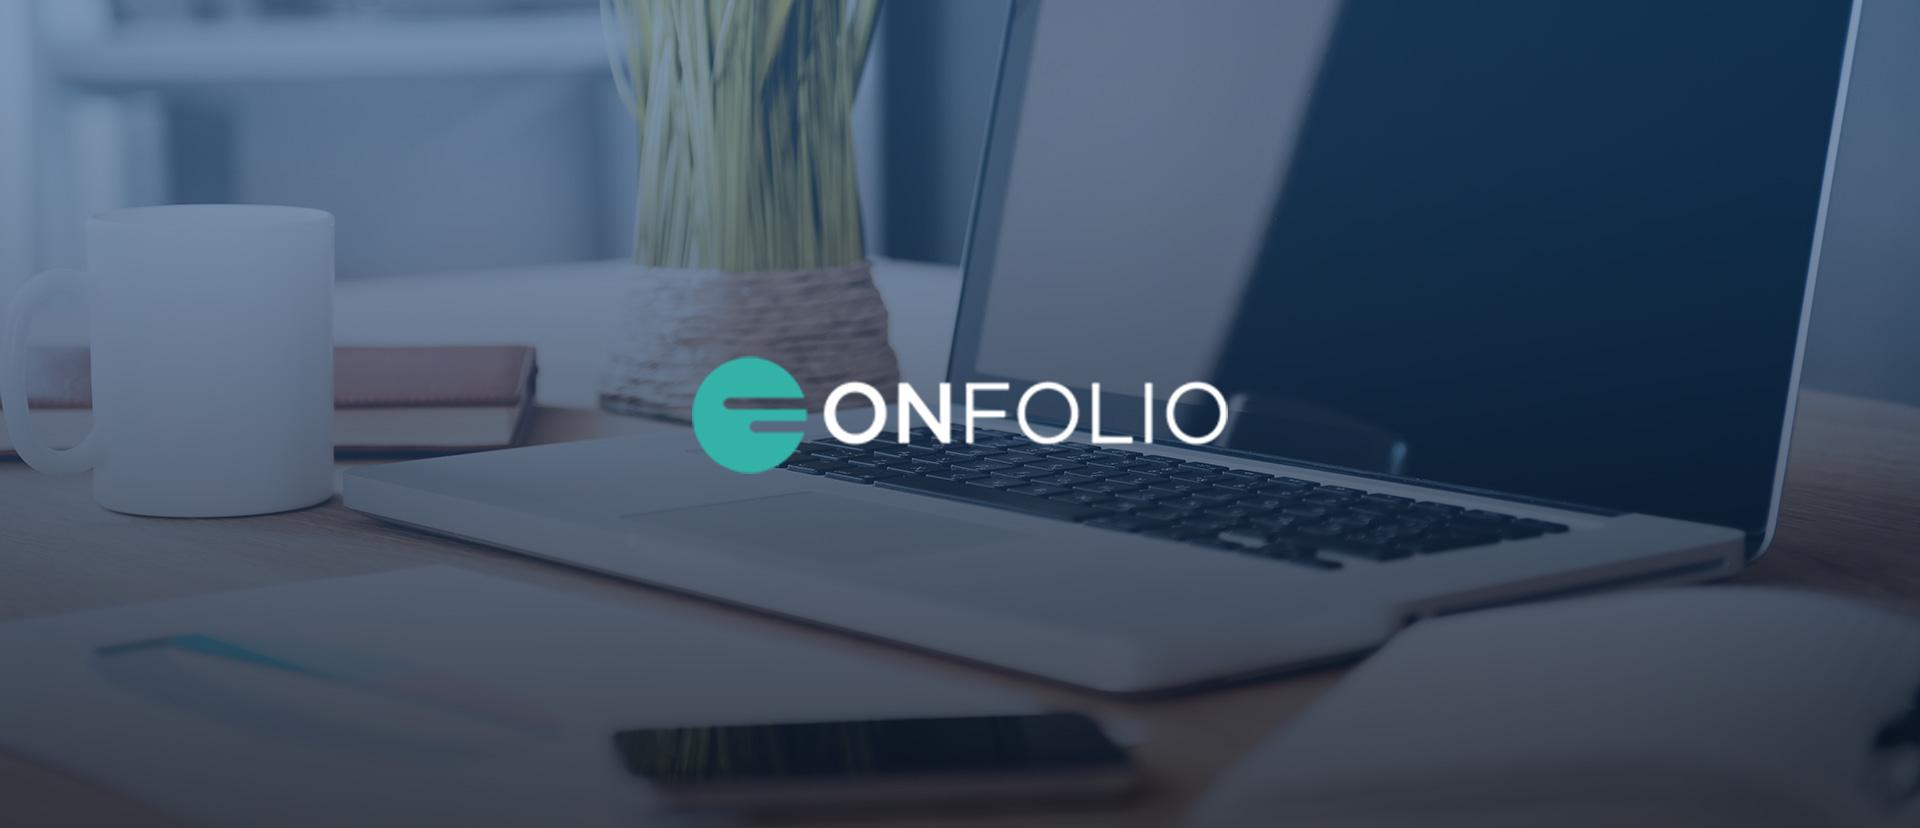 IPO Onfolio Holdings: Venture Investments in Sites